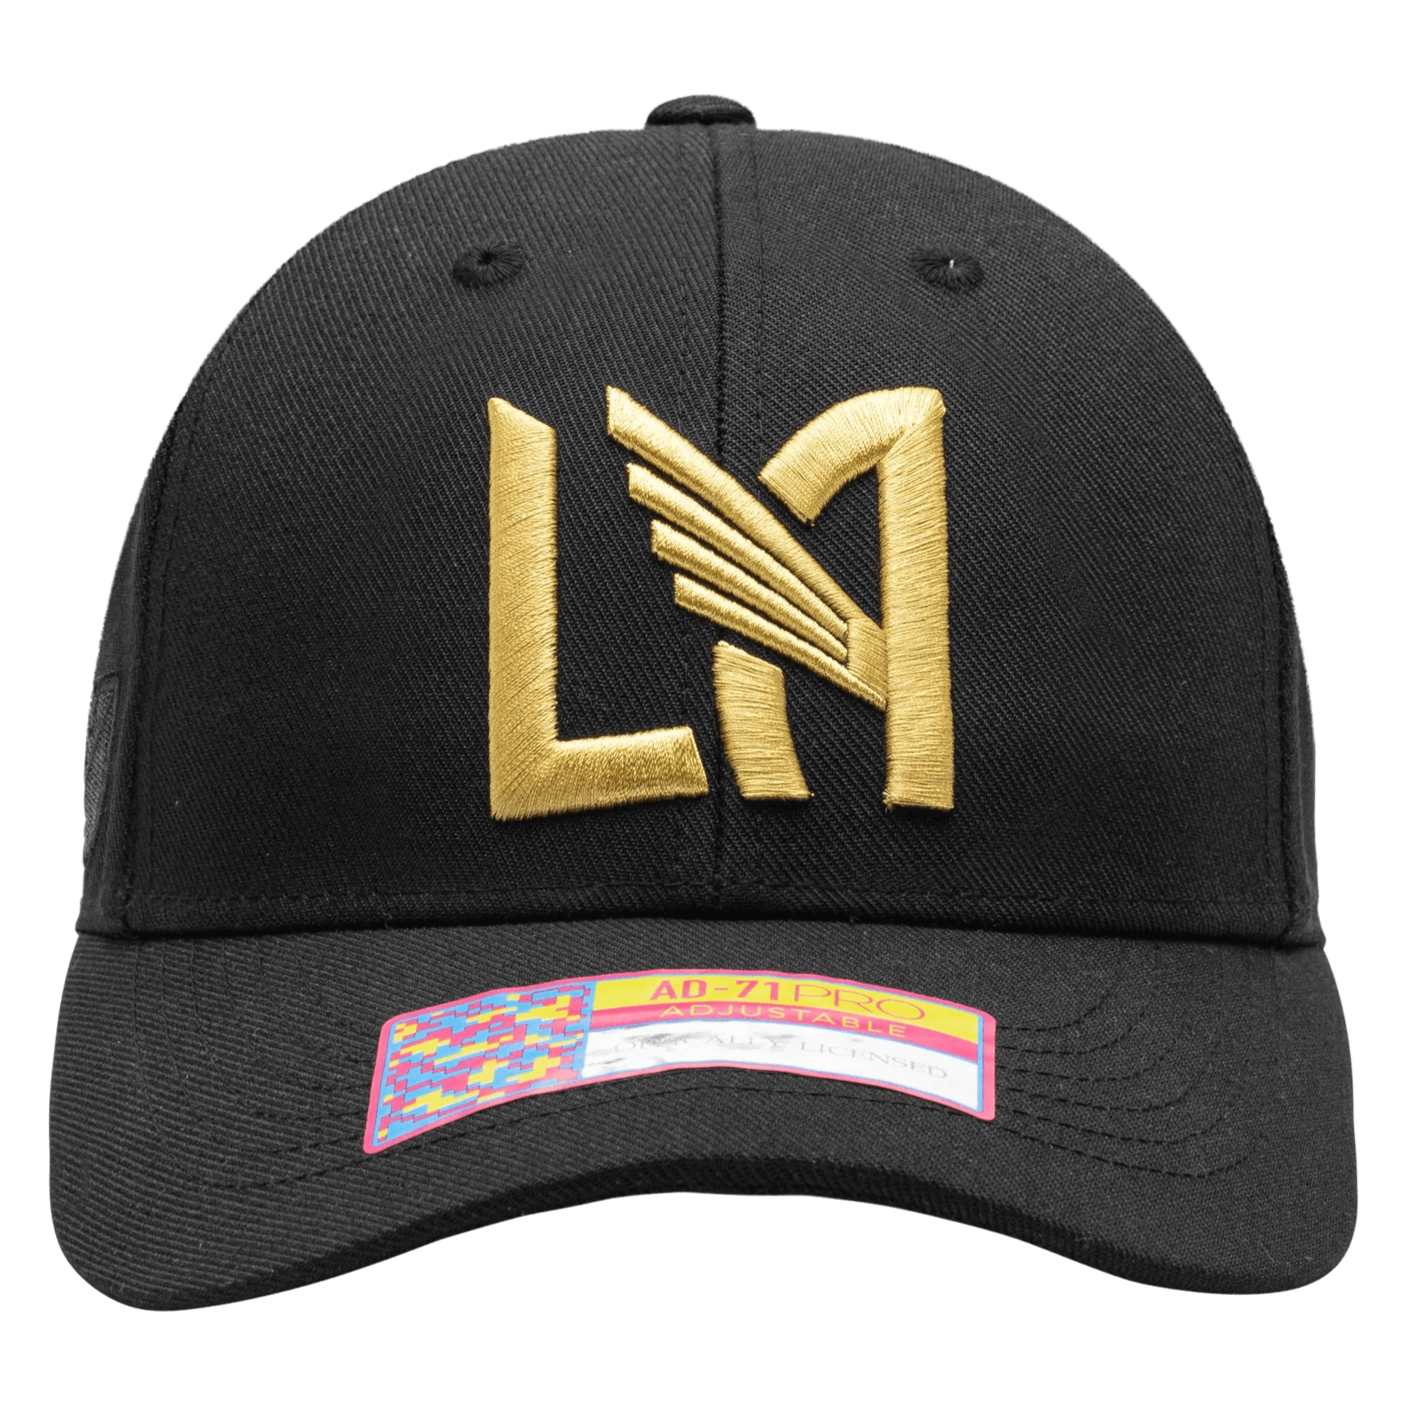 FI Collection LAFC Standard Adjustable Cap (Front)